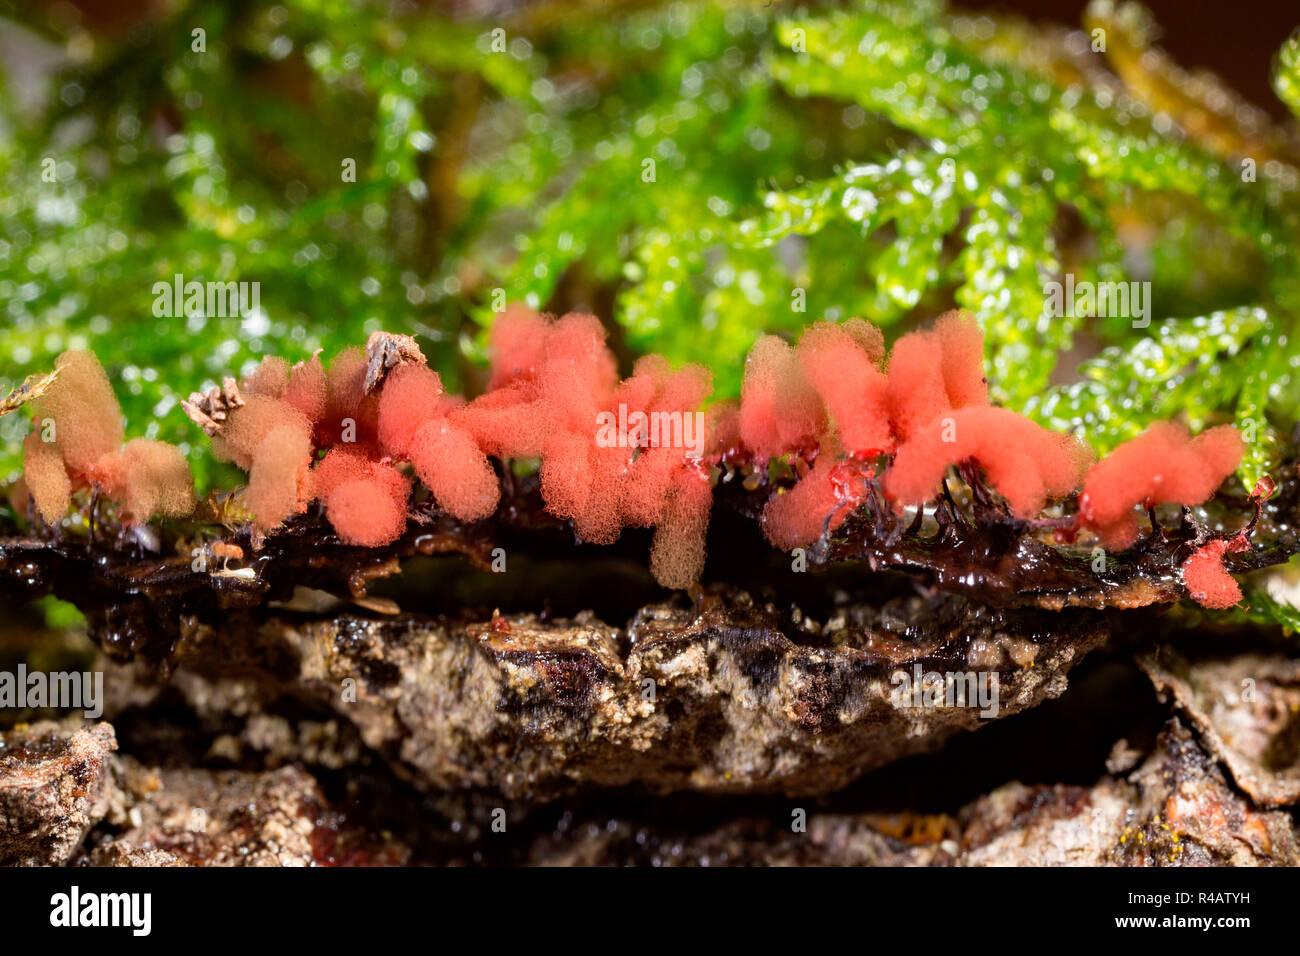 carnival candy slime mold, (Arcyria denudata) Stock Photo